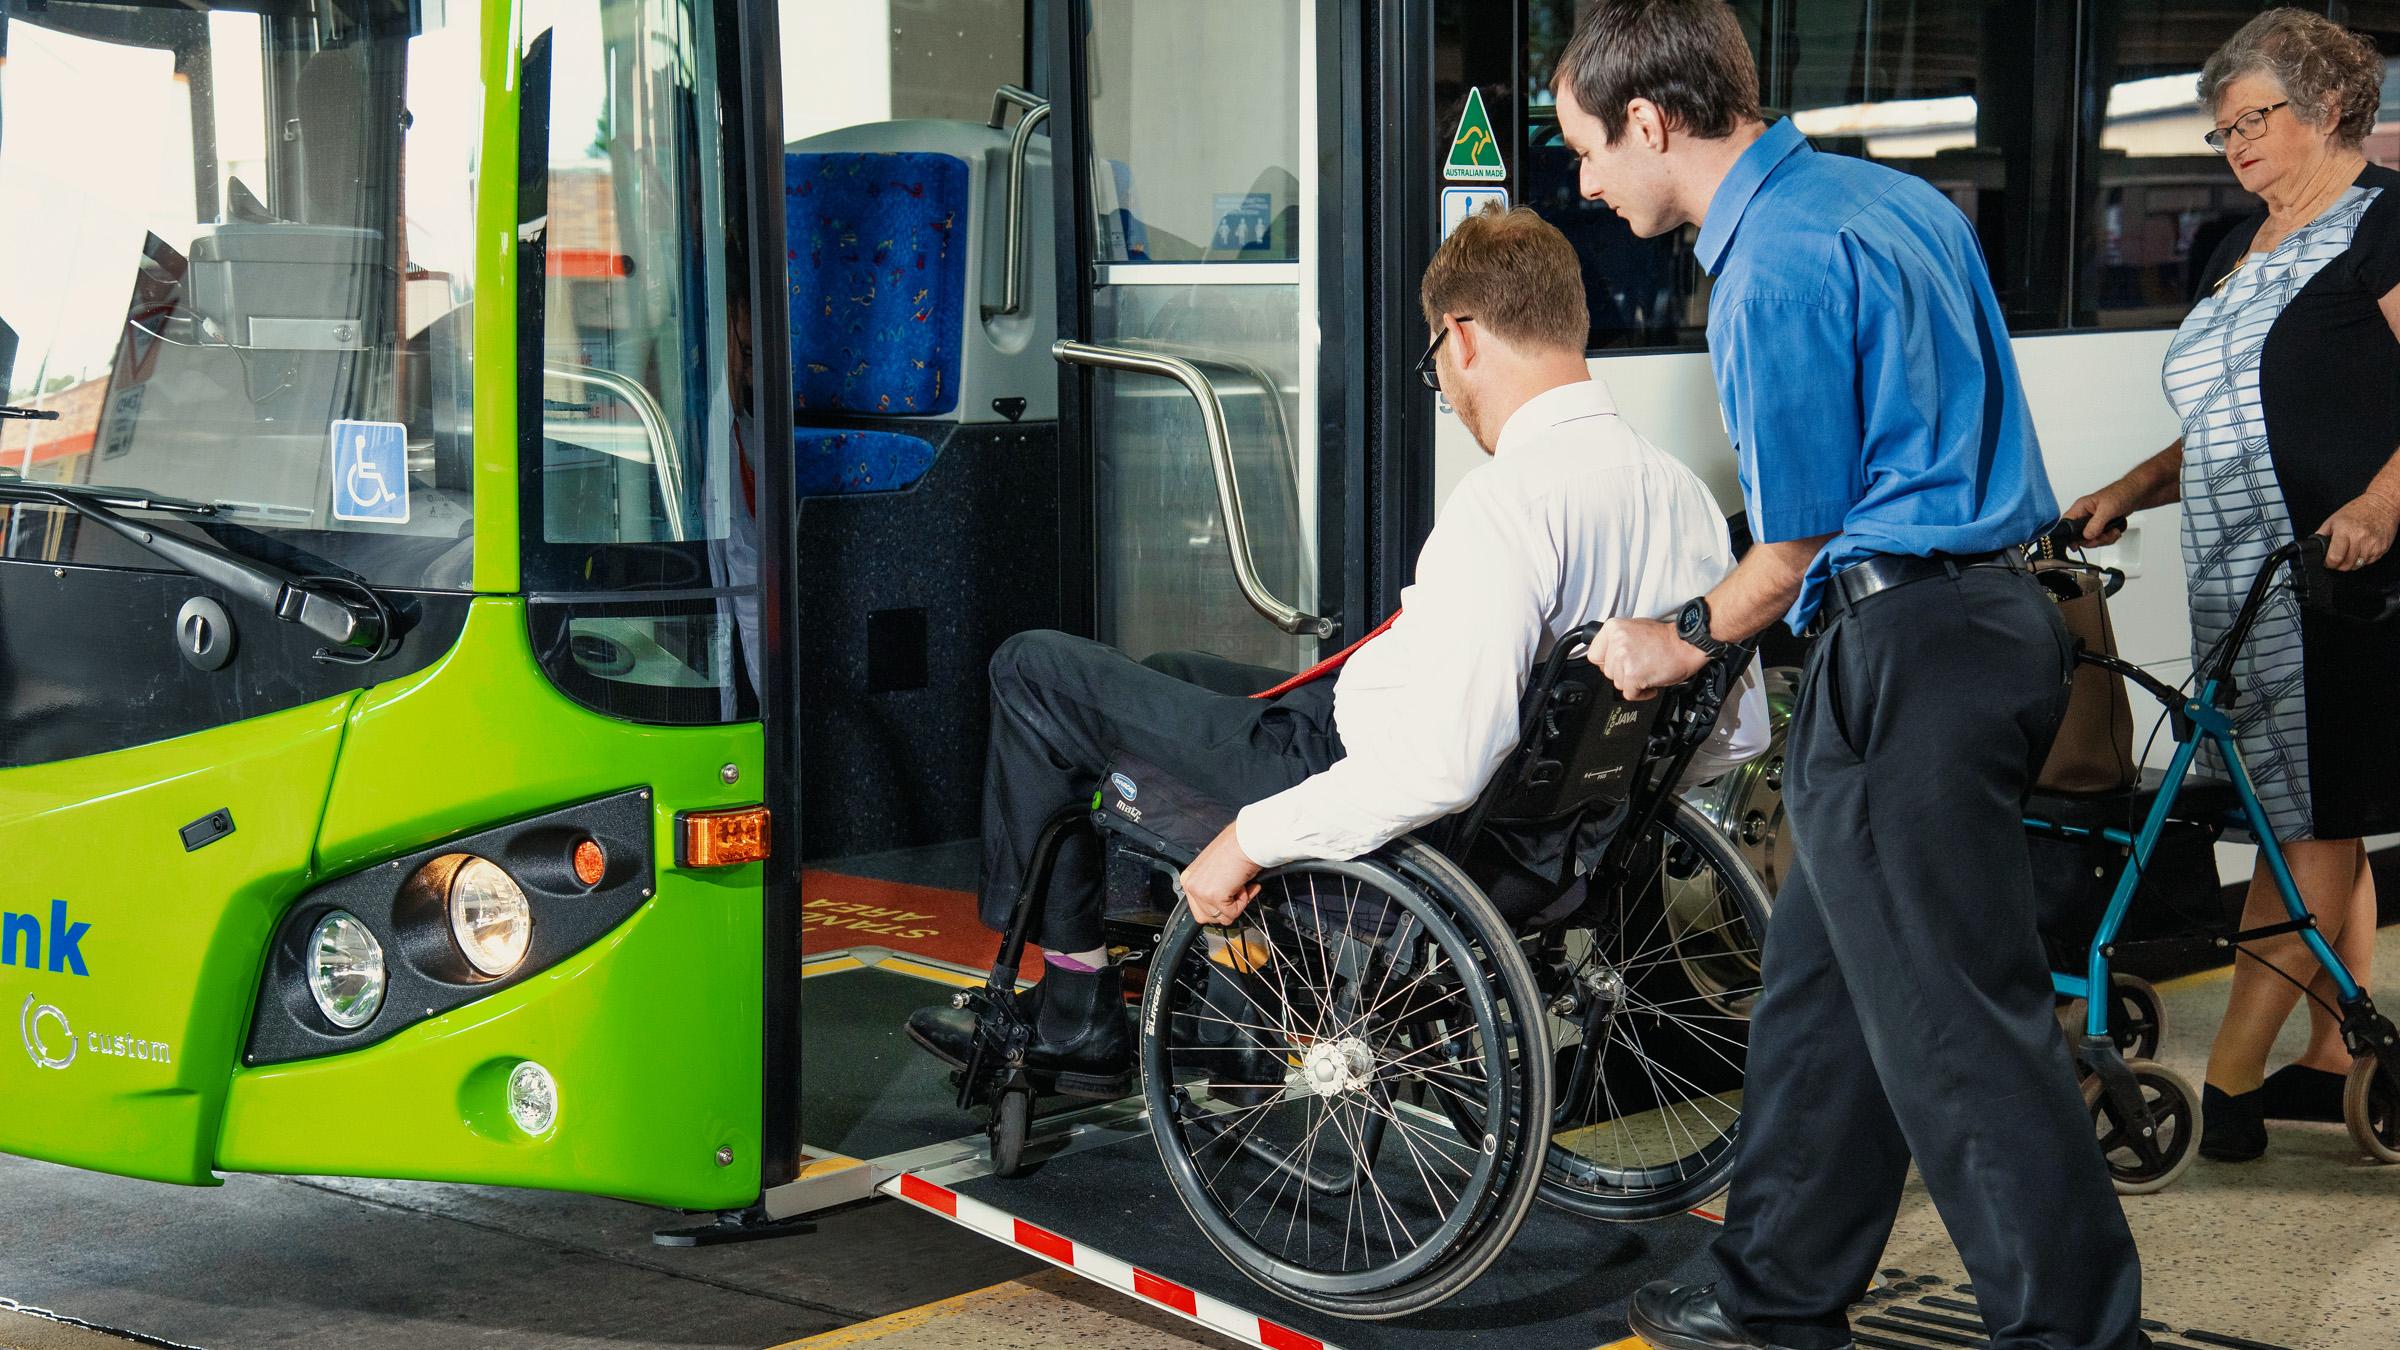 Bus driver assisting a person in a wheelchair to get onto the bus via a ramp